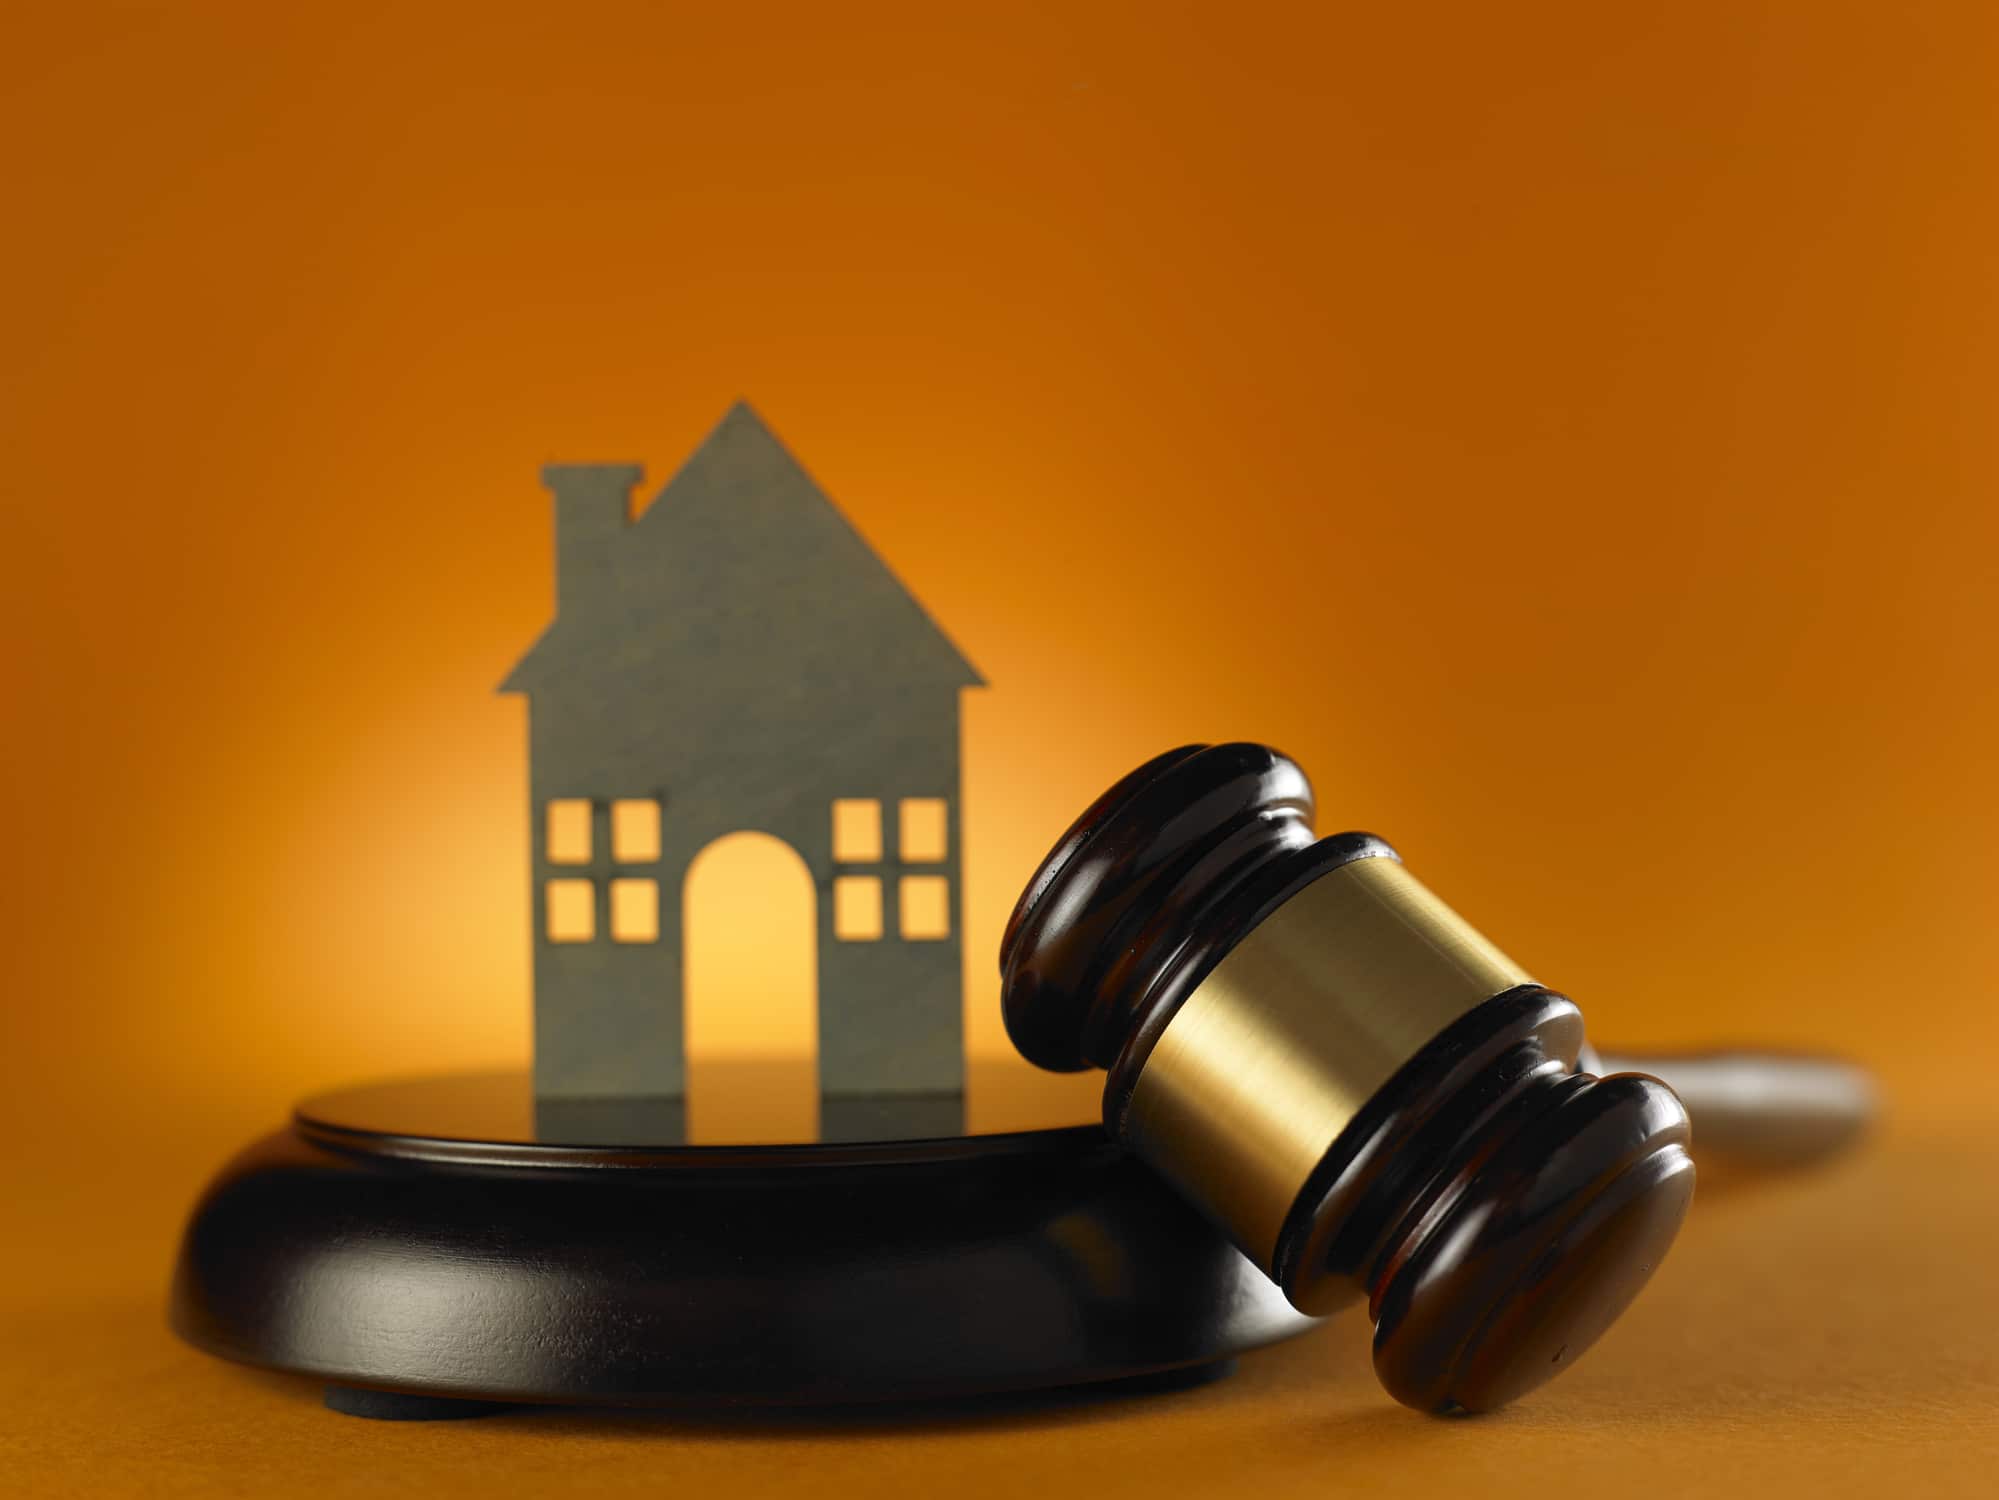 gavel and house image - probate attorney honolulu